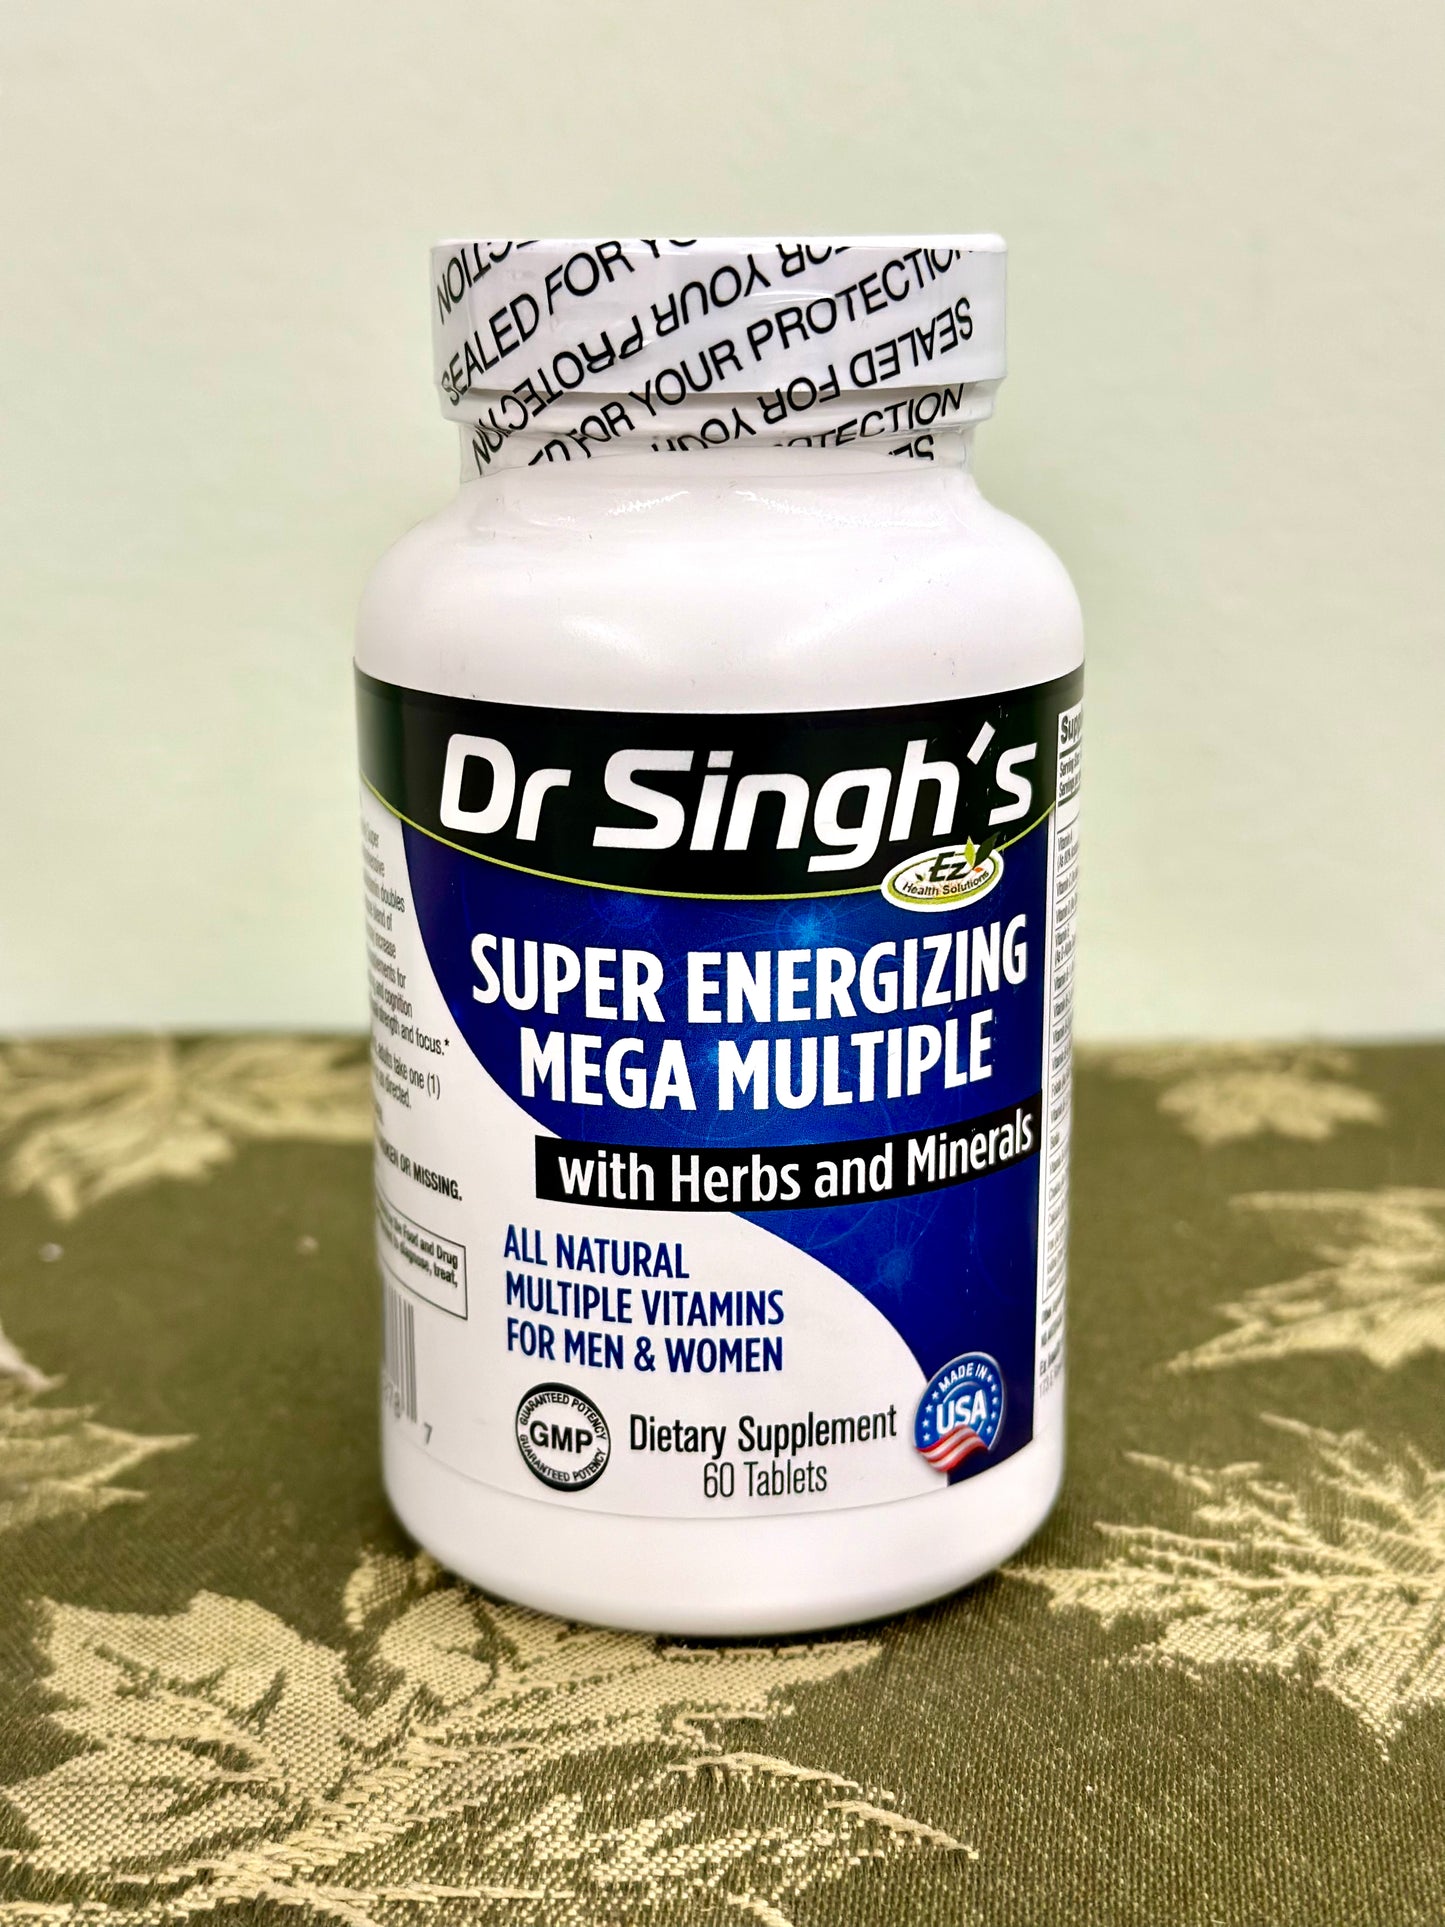 Dr Singh’s Super Energizing Mega Multiple with Herbs and Minerals